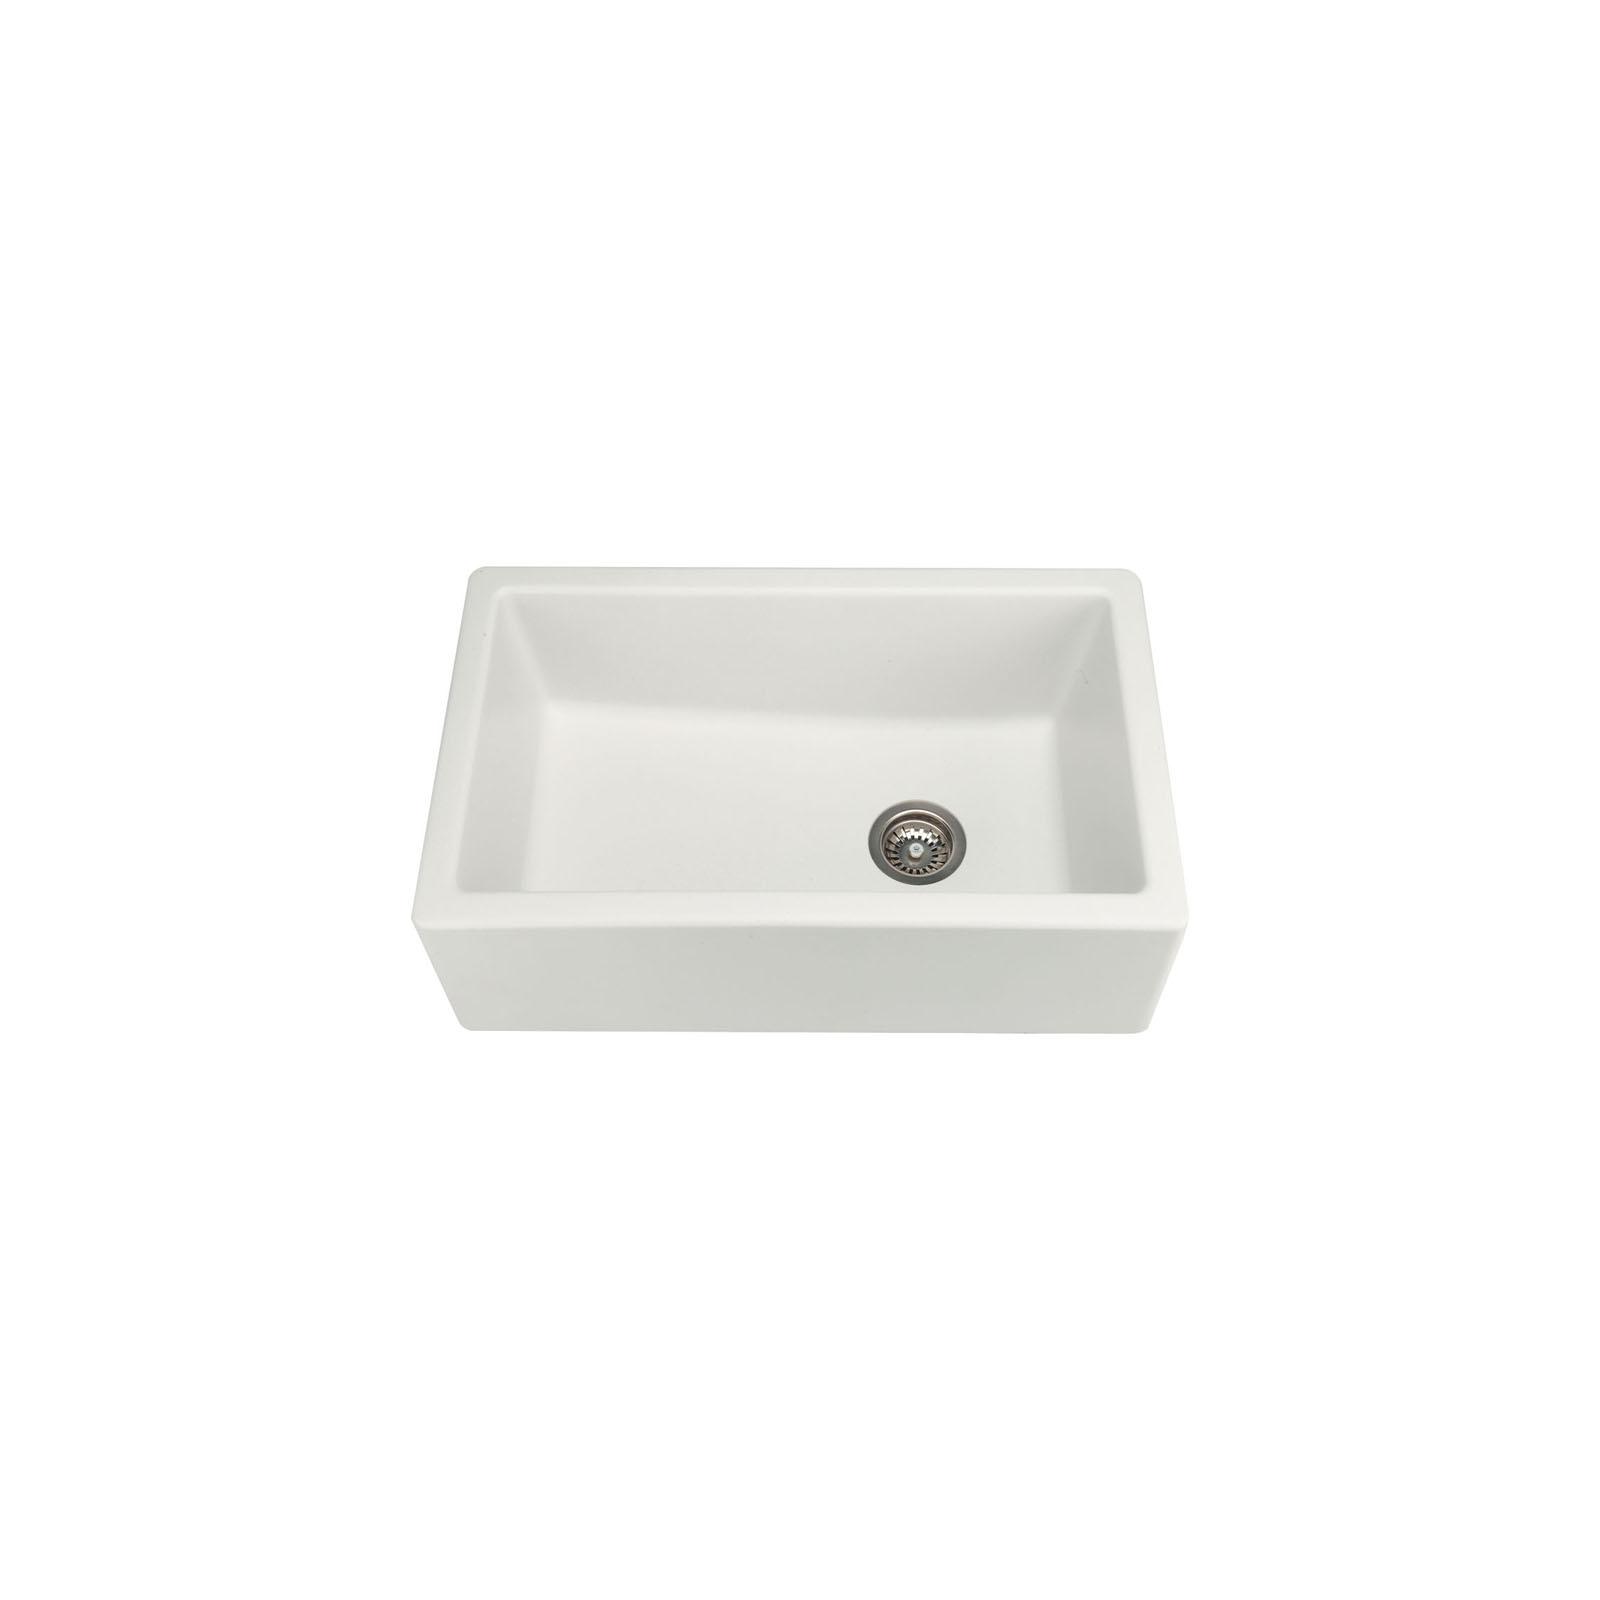 High-quality sink Philippe II granit white - one bowl